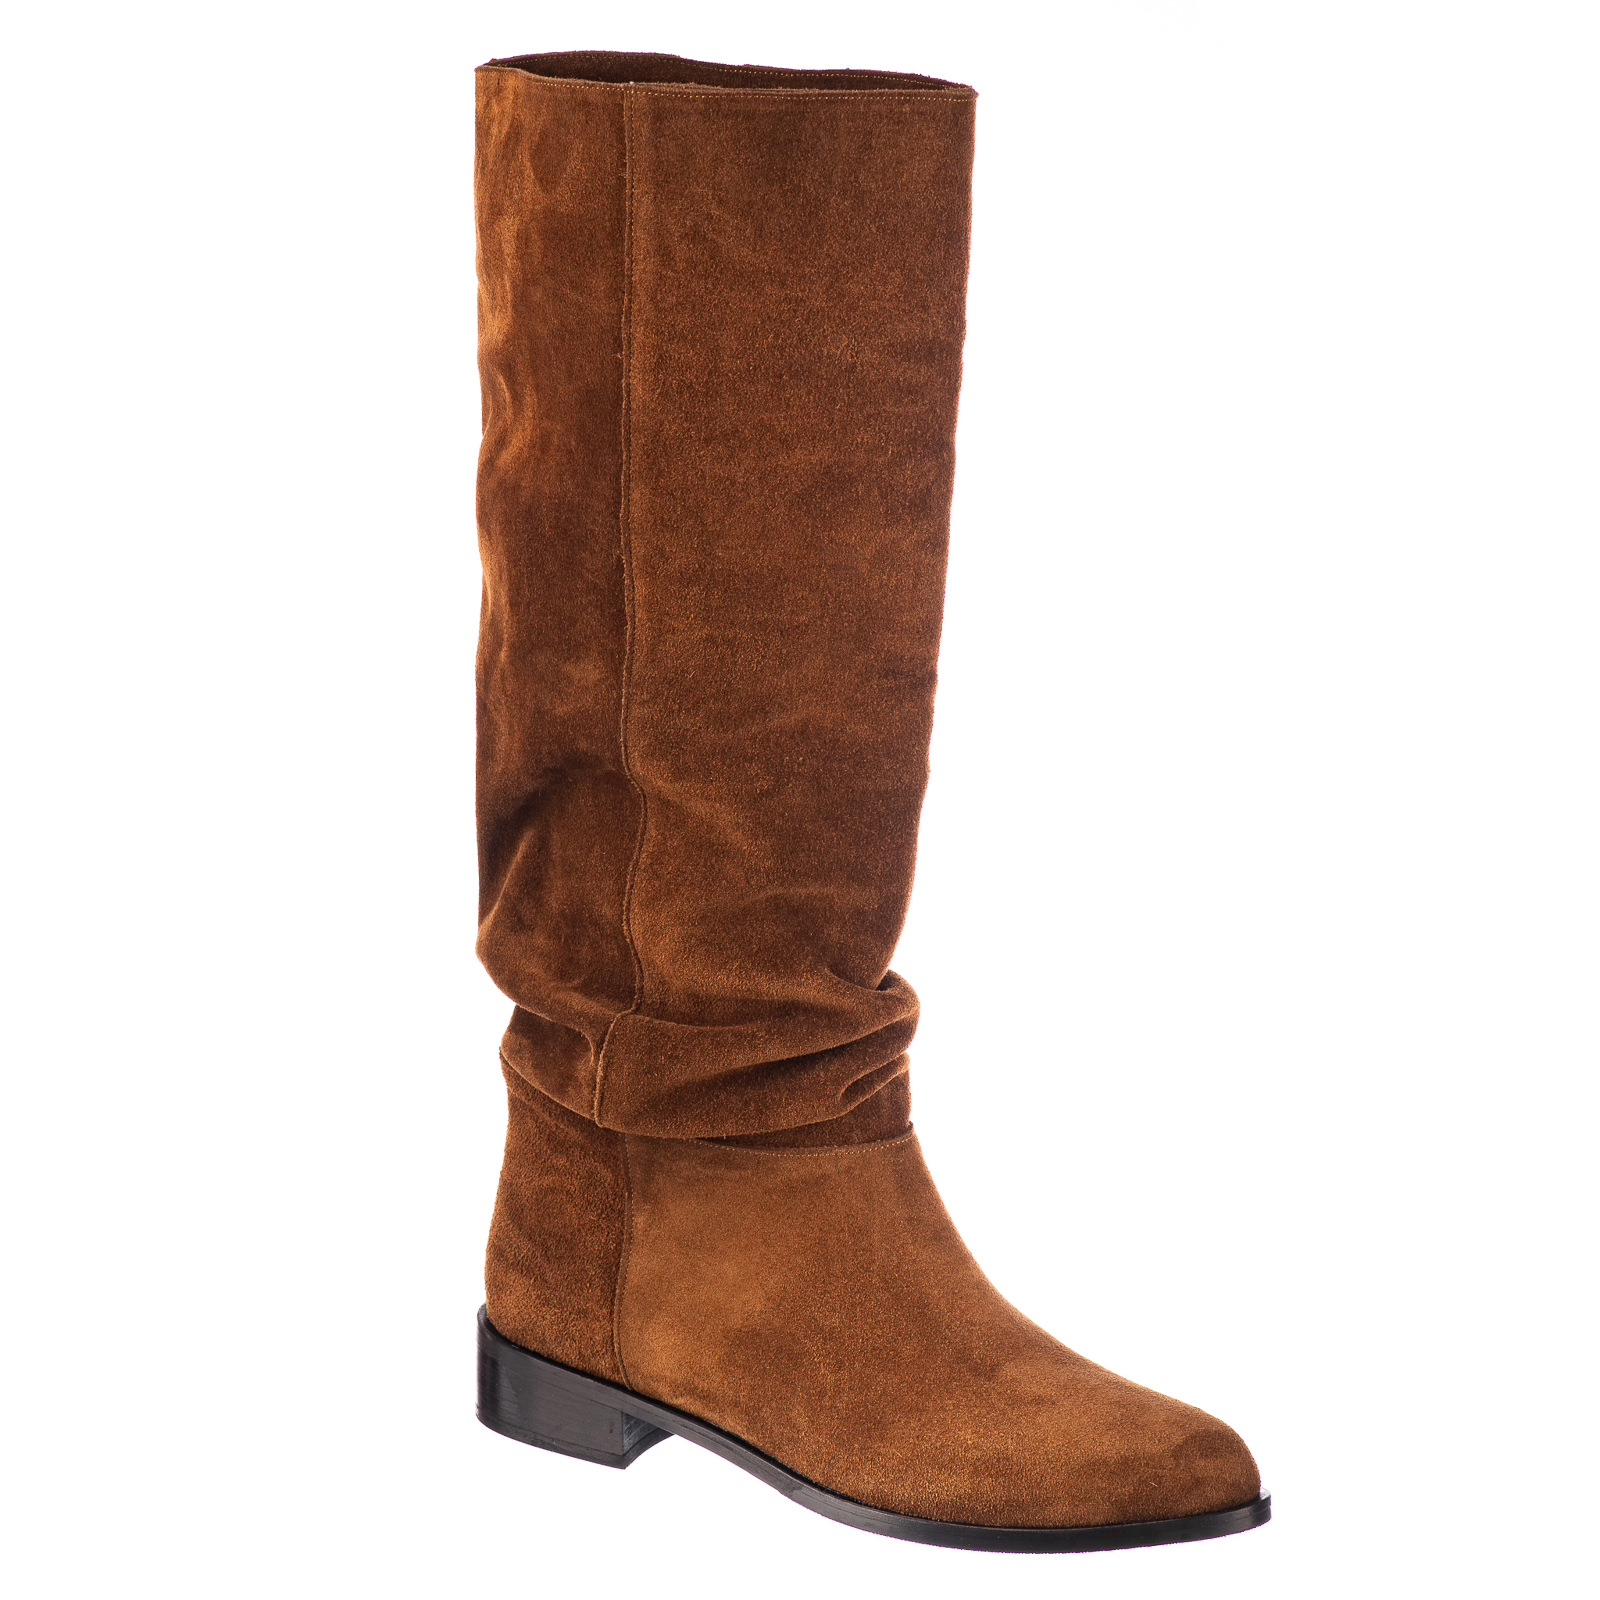 Leather boots B736 - CAMEL